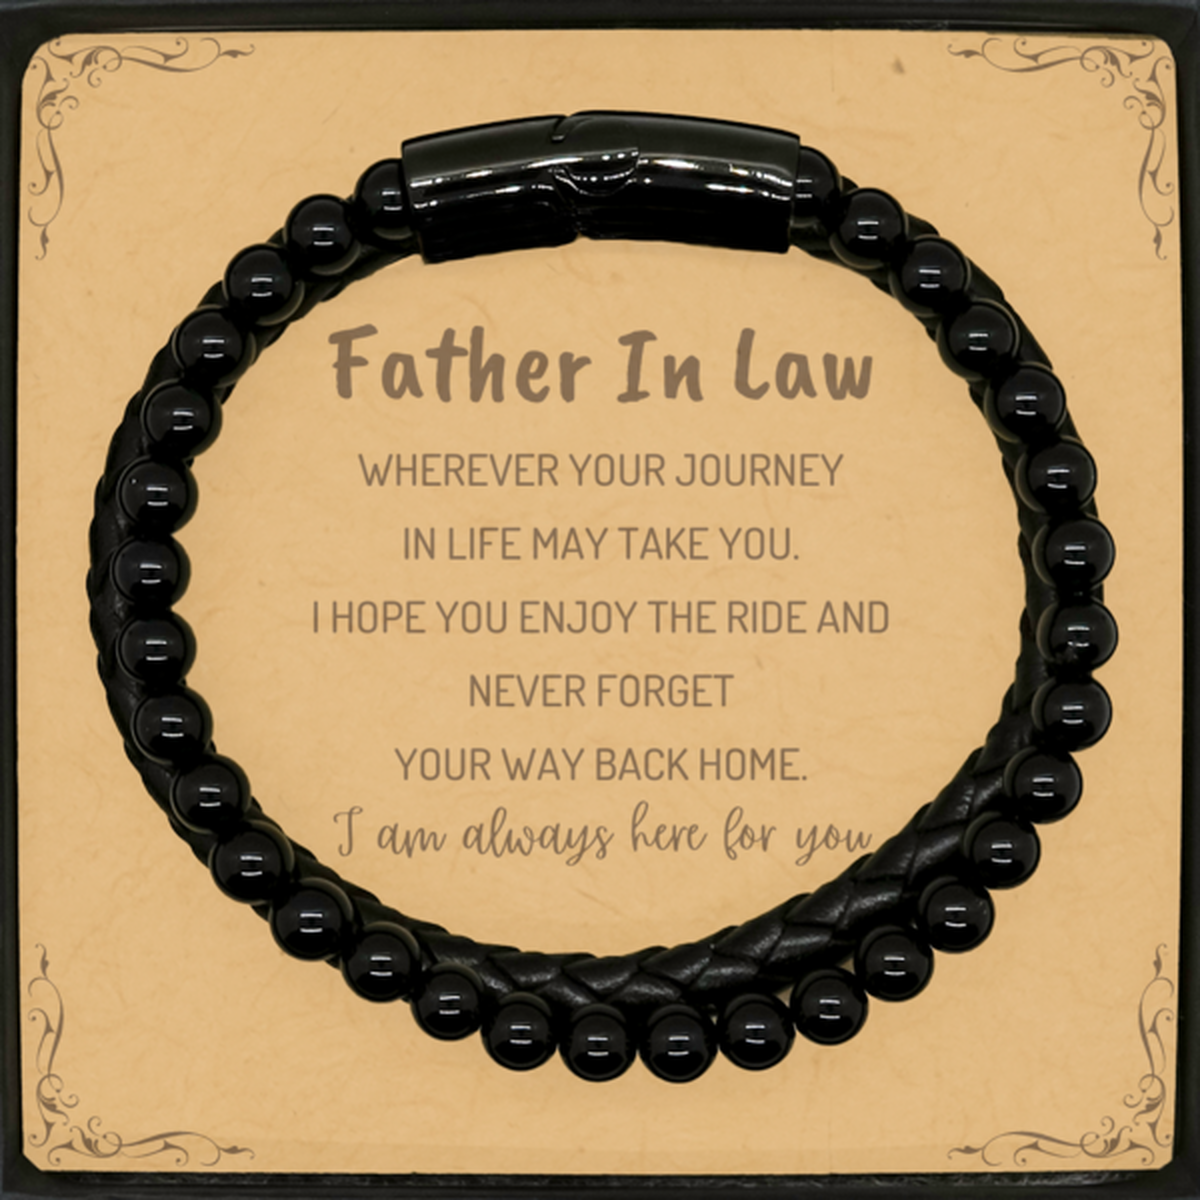 Father In Law wherever your journey in life may take you, I am always here for you Father In Law Stone Leather Bracelets, Awesome Christmas Gifts For Father In Law Message Card, Father In Law Birthday Gifts for Men Women Family Loved One